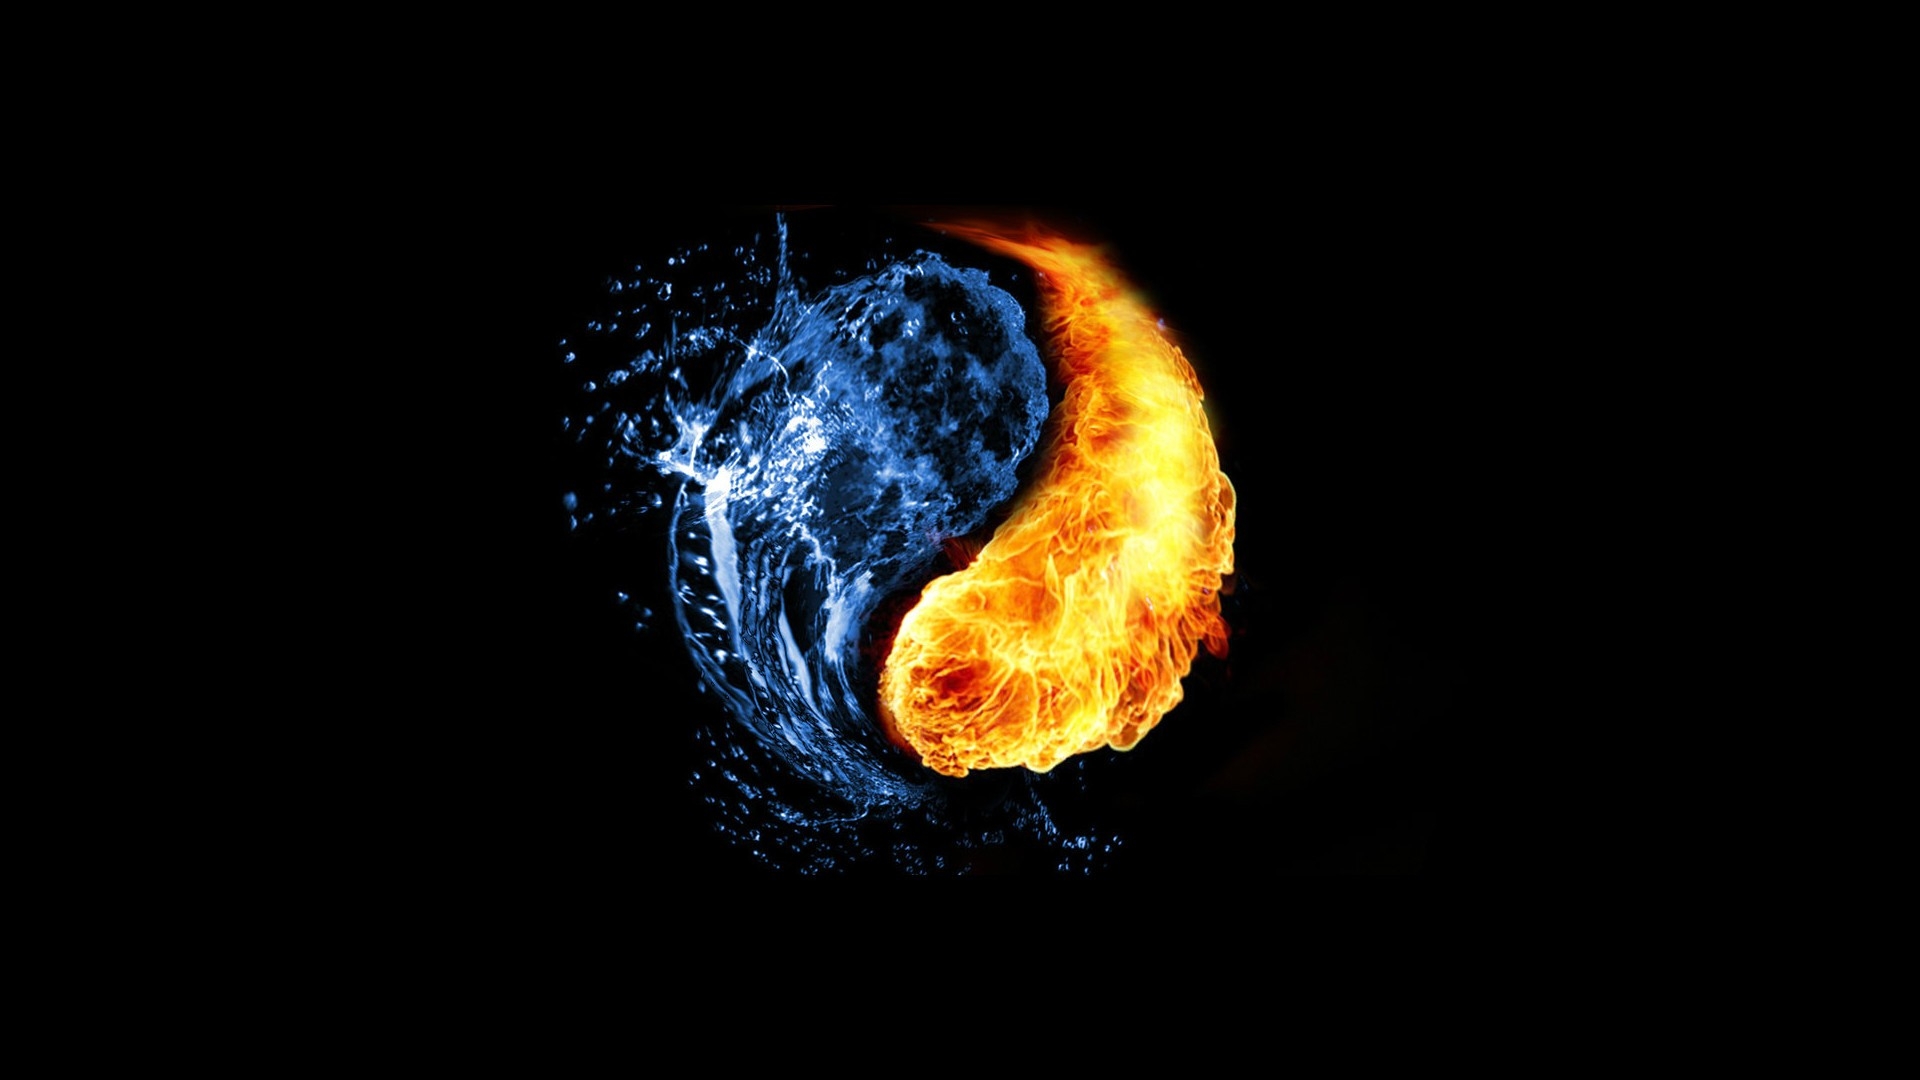 water, Abstract, Fire, Ying, Yang, Black, Background Wallpaper